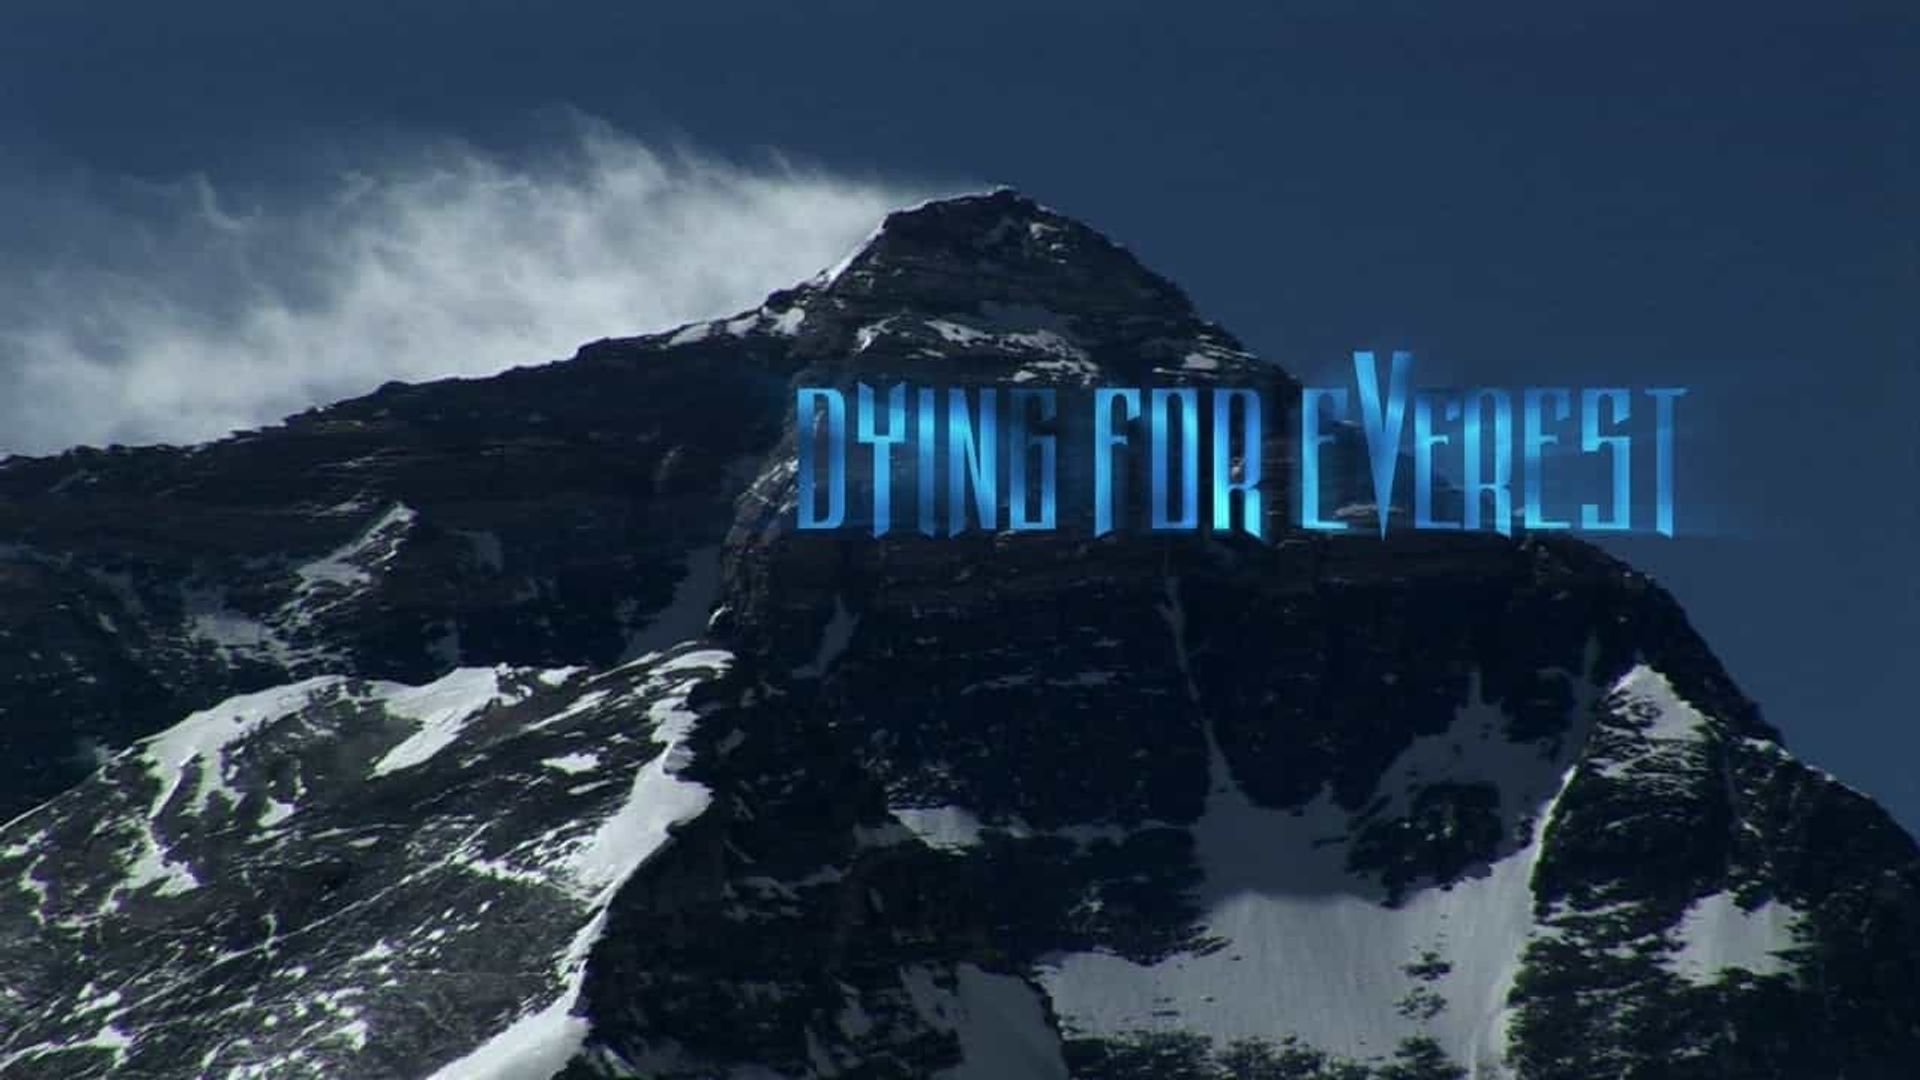 Dying for Everest background